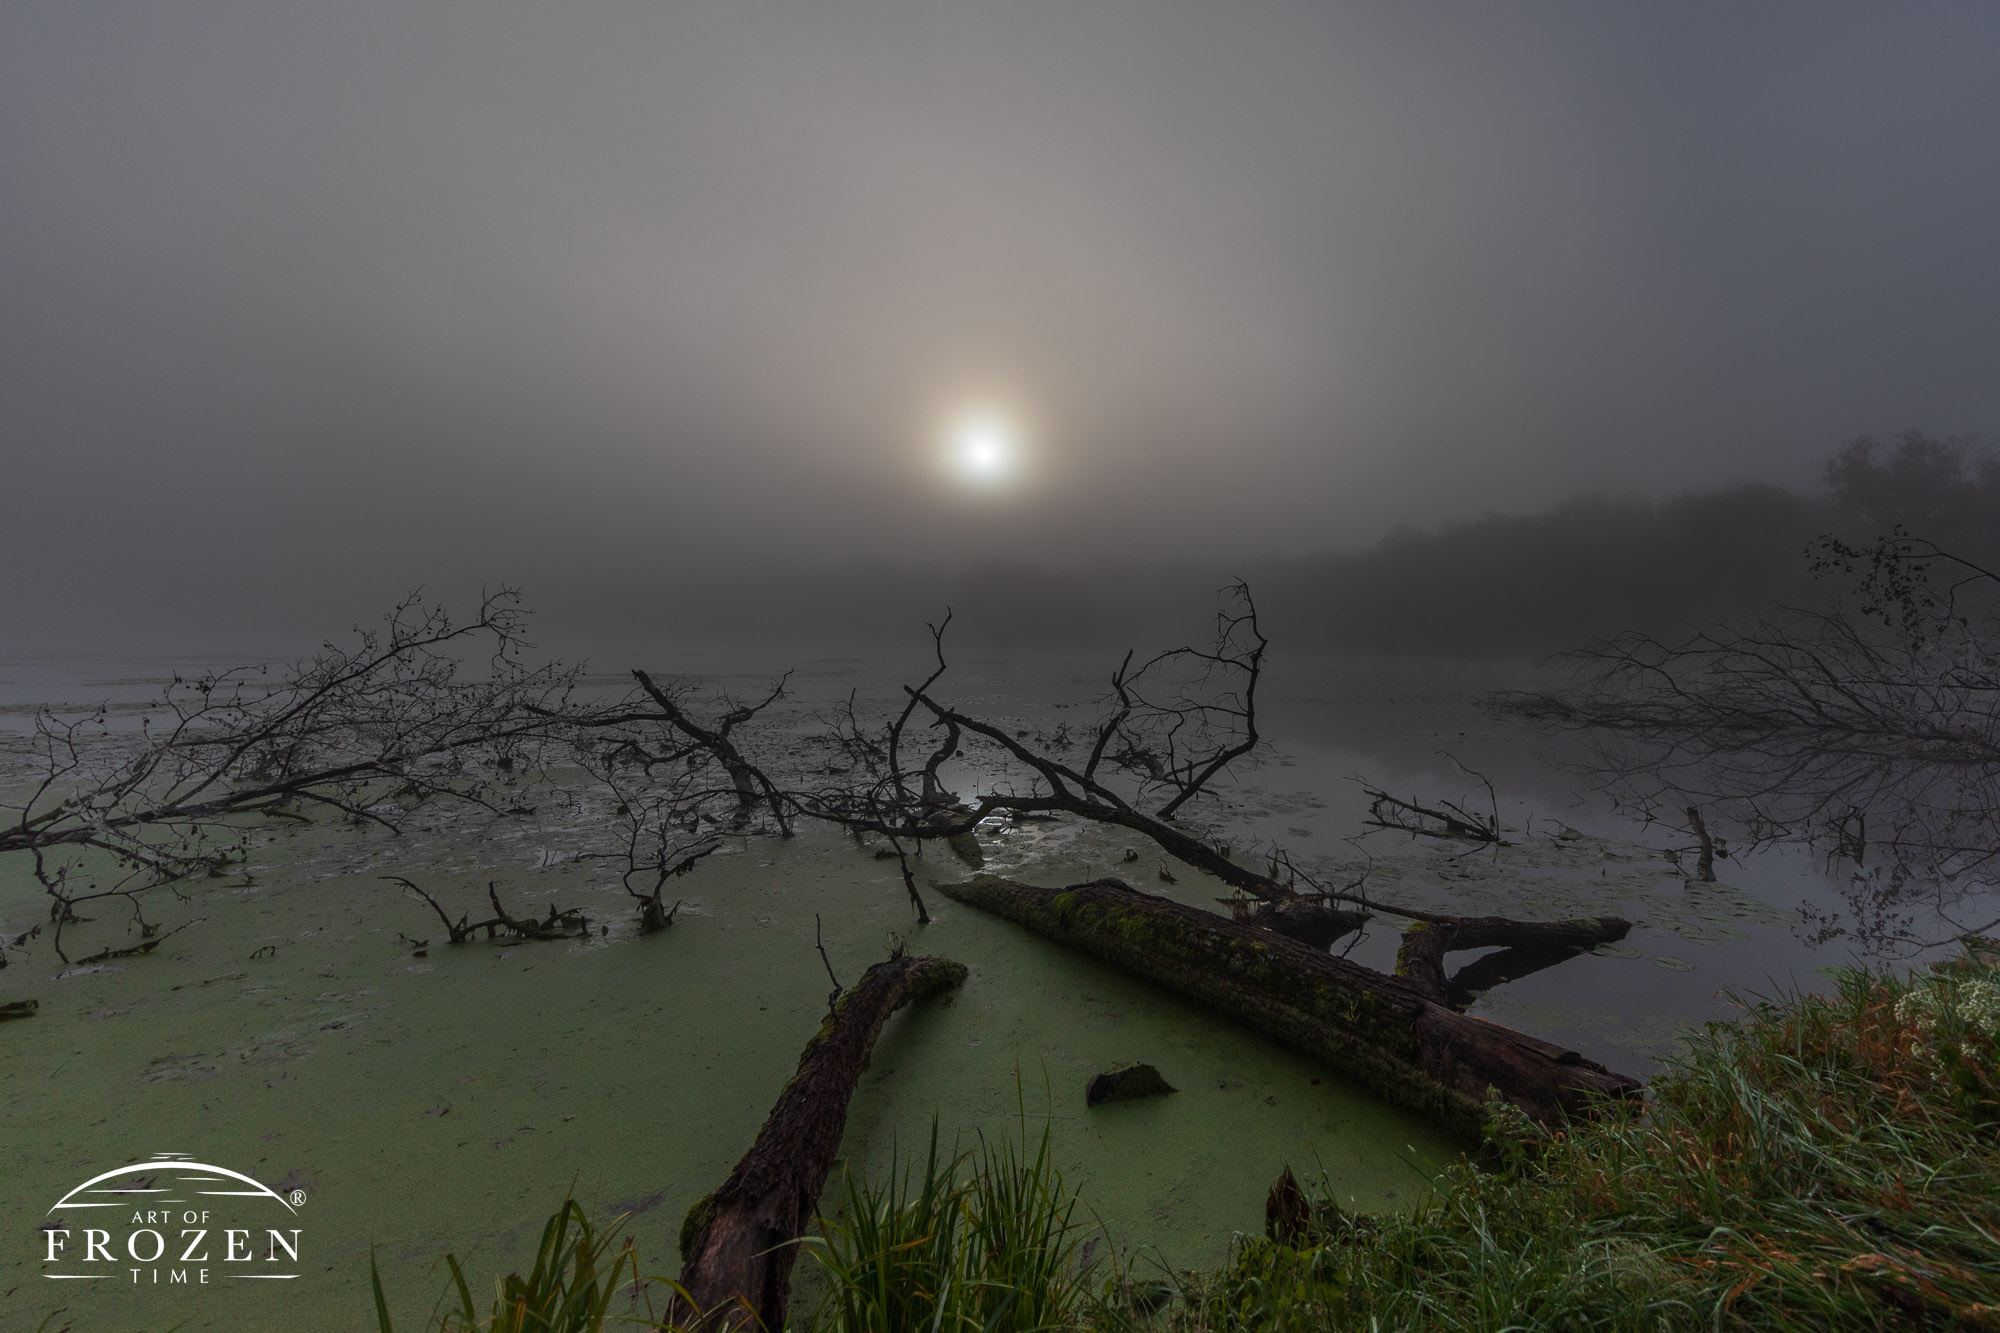 A think fog bank renders the sun to moon-like brightness as a fallen tree lies in the marsh creating a habitat for fish, amphibians and insects.